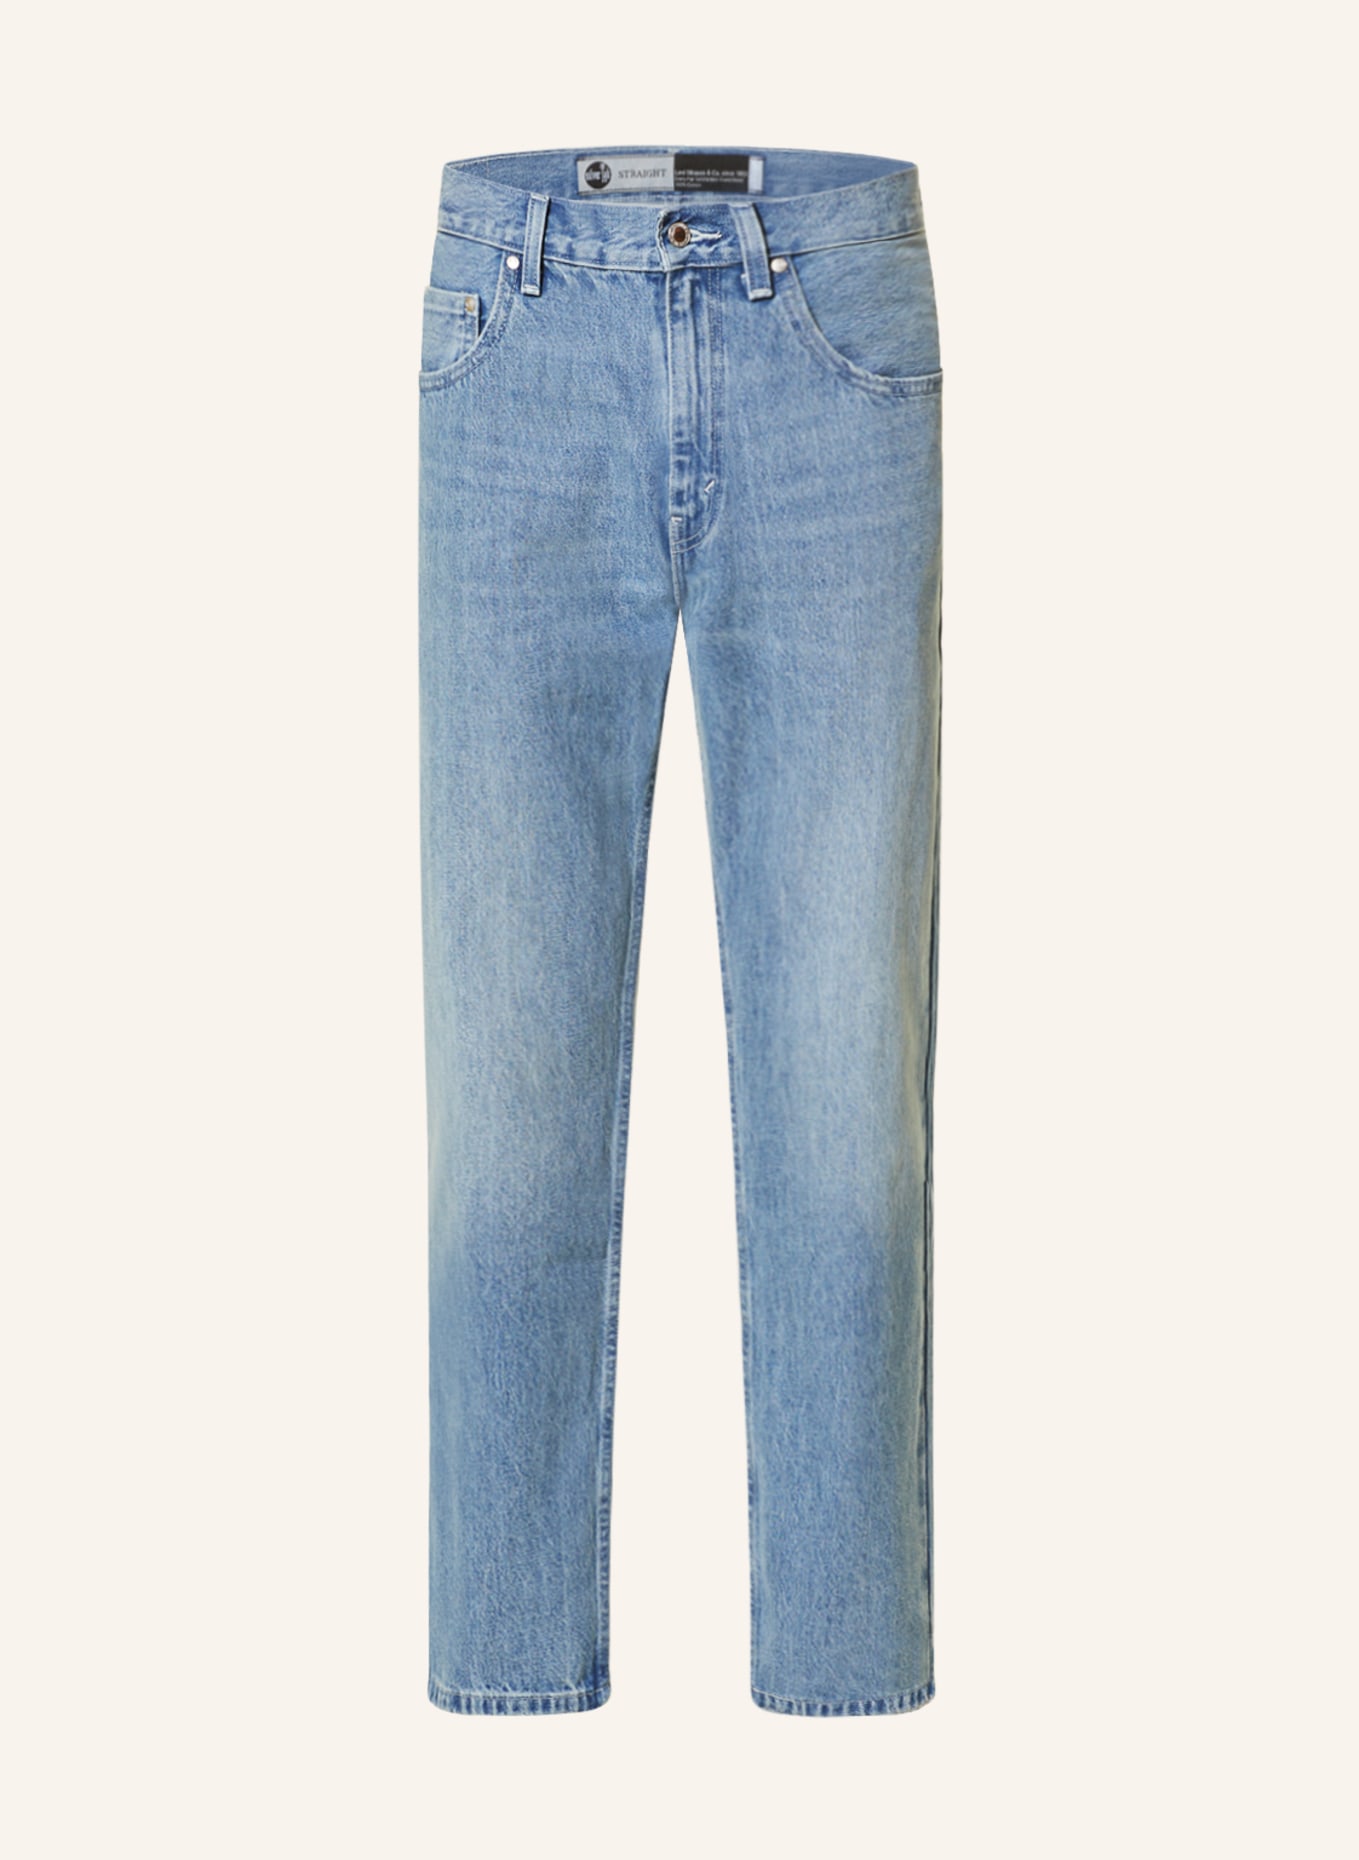 Levi's® Jeans SILVERTAB® straight fit, Color: 05 Med Indigo - Worn In (Image 1)